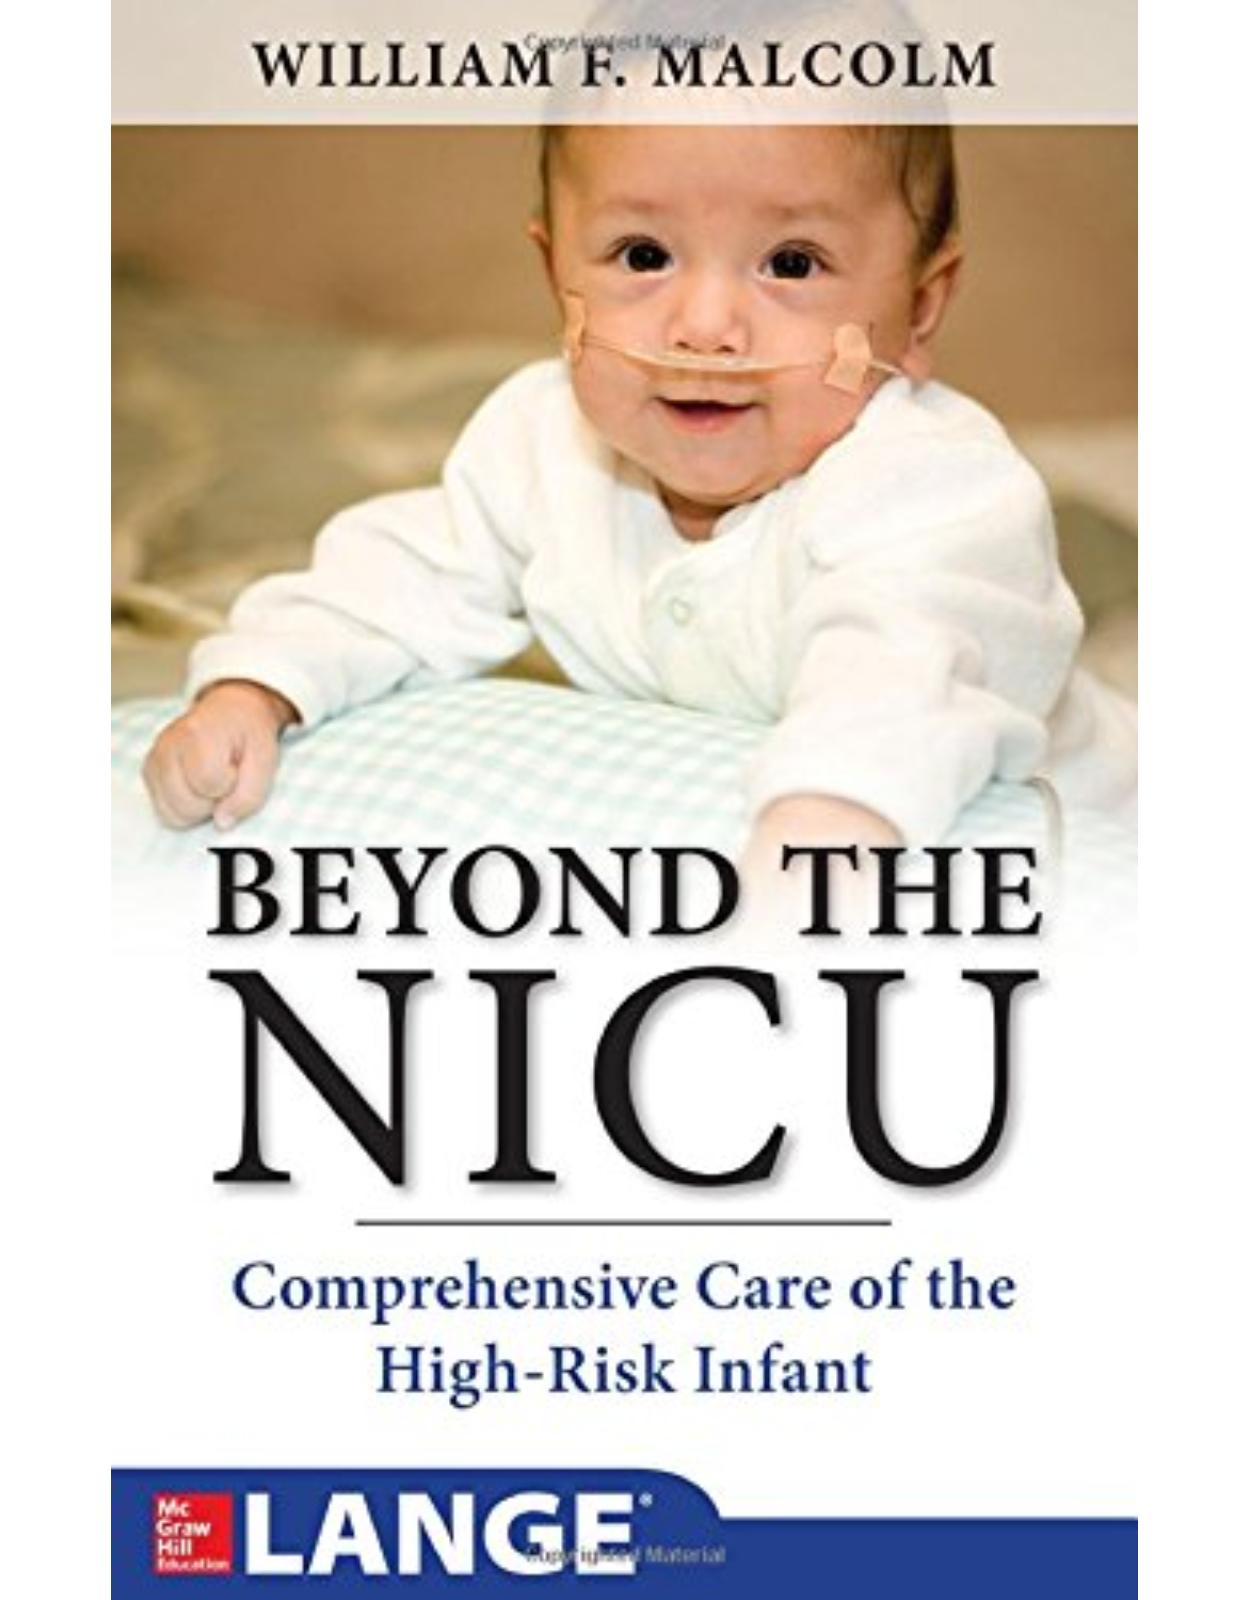 BEYOND THE NICU: COMPREHENSIVE CARE OF THE HIGH-RISK INFANT